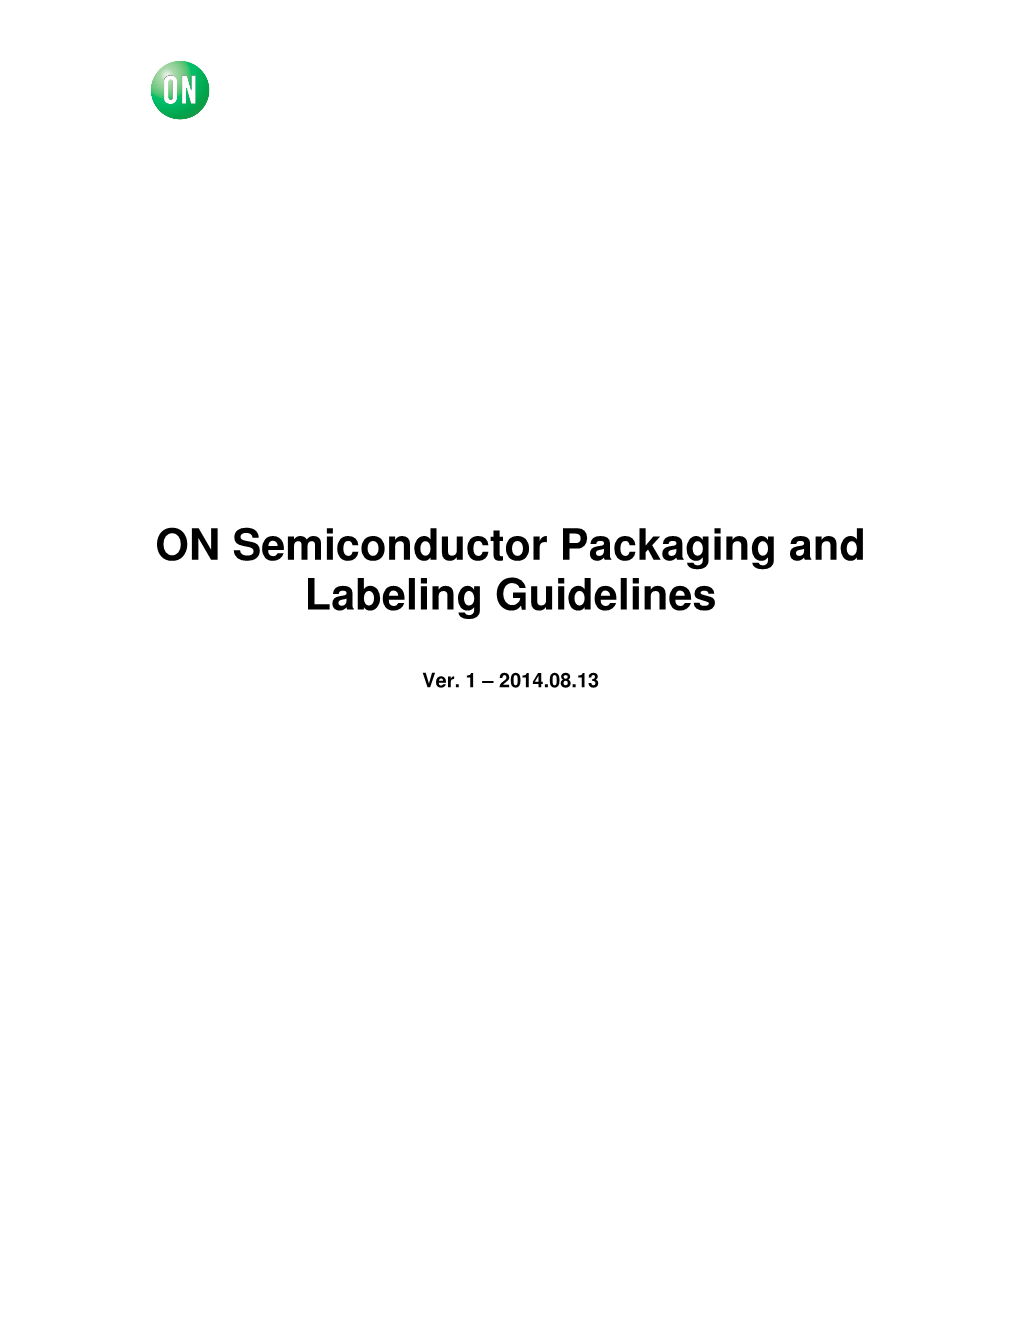 ON Semiconductor Packaging and Labeling Guidelines